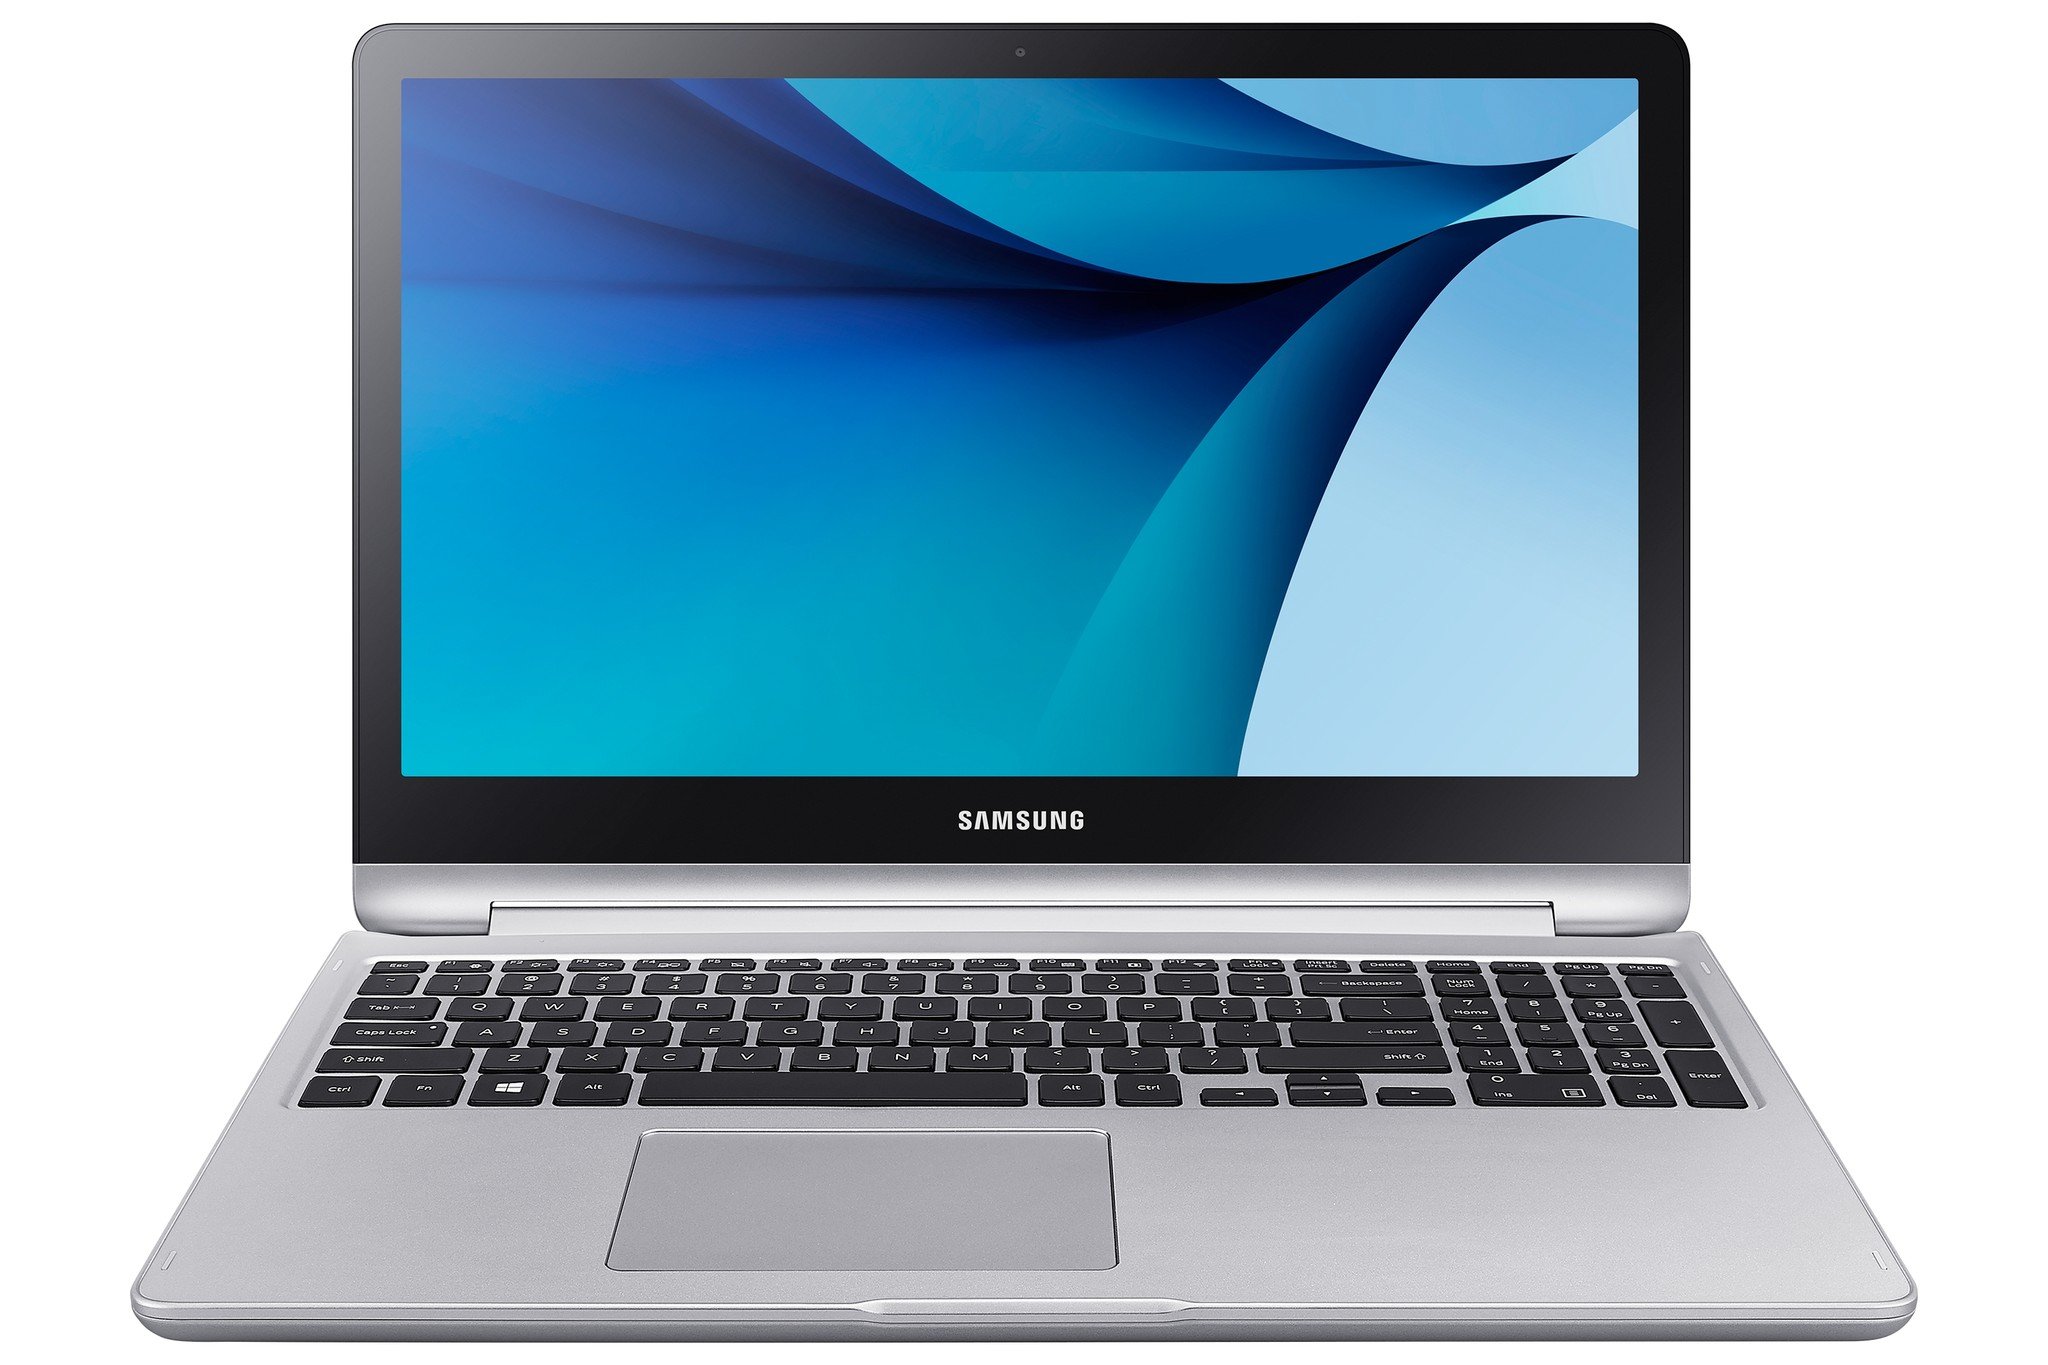 Samsung Notebook 7 Spin (2018) Specifications